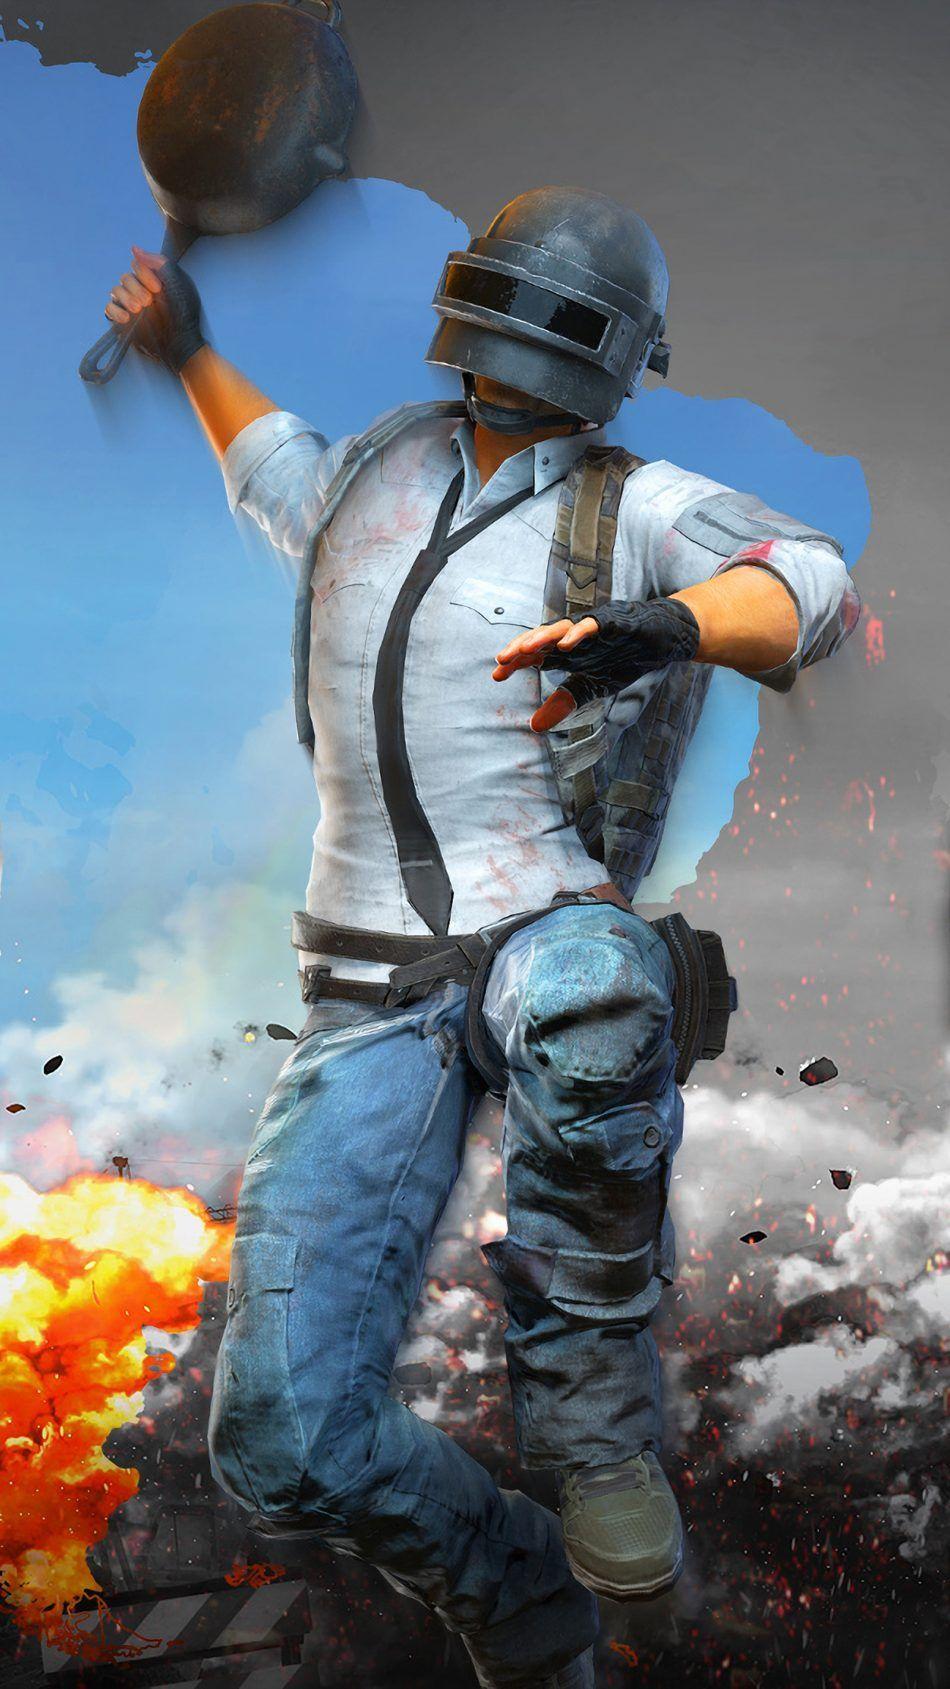 PUBG Helmet Guy Attacking With Pan. PUBG. Mobile wallpaper